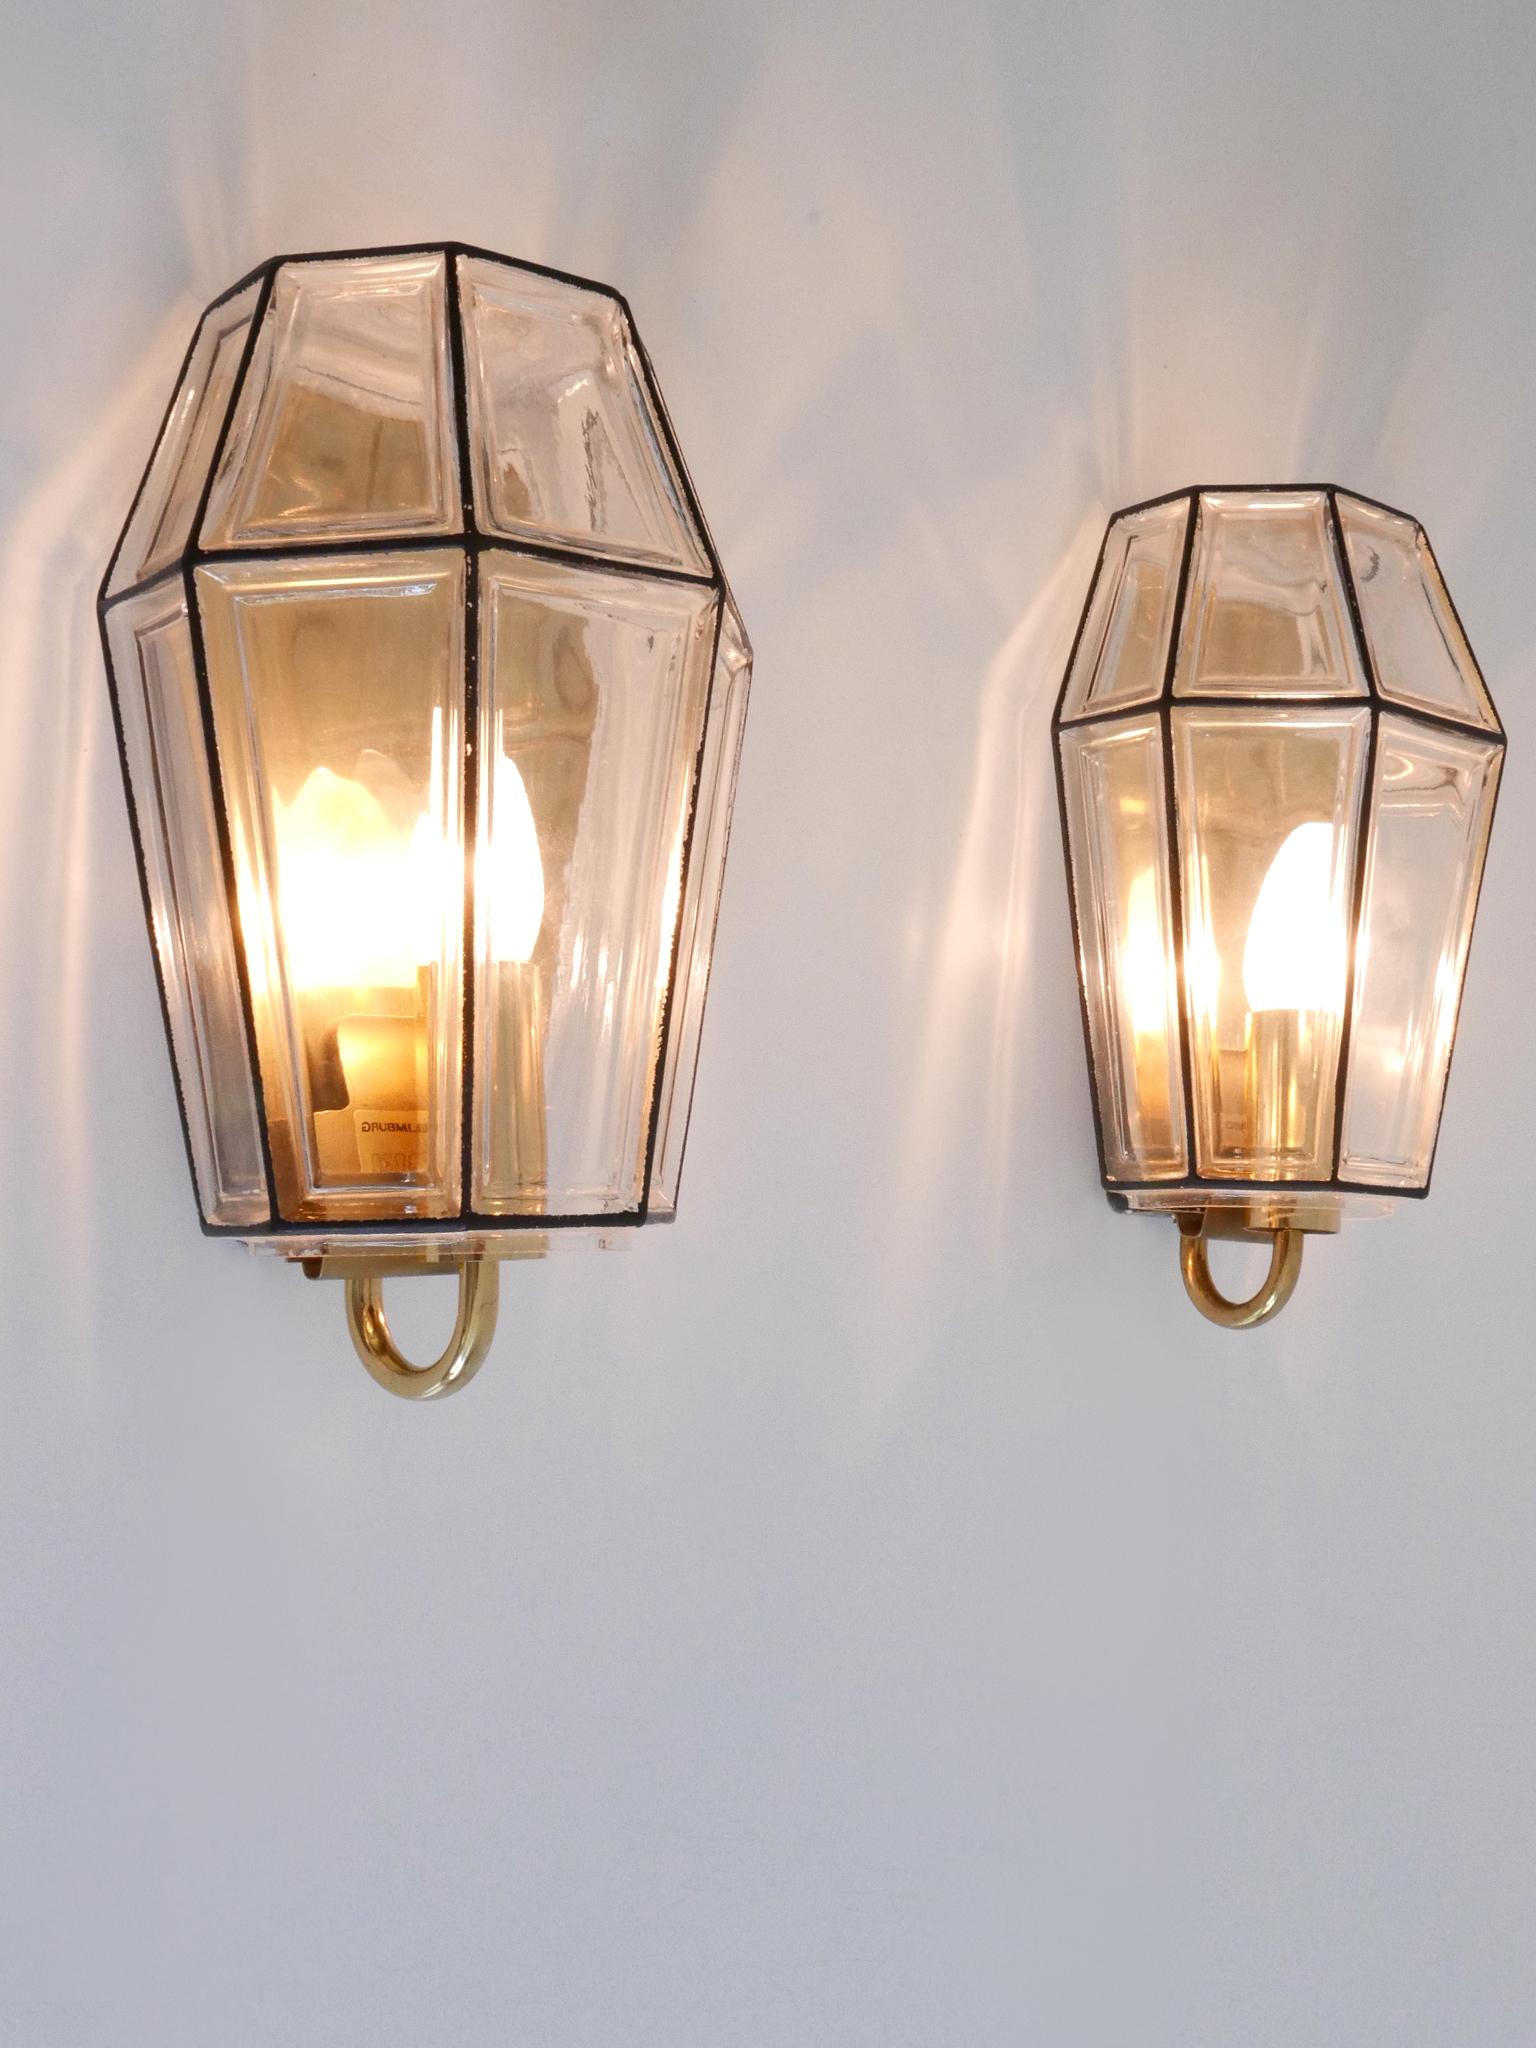 Set of Two elegant and highly decorative Mid-Century Modern sconces or wall fixtures. Designed & manufactured by Glashütte Limburg, Germany, 1960s.

Executed in glass and brass, each fixture is executed with 1 x E14 / E12 Edison screw fit bulb